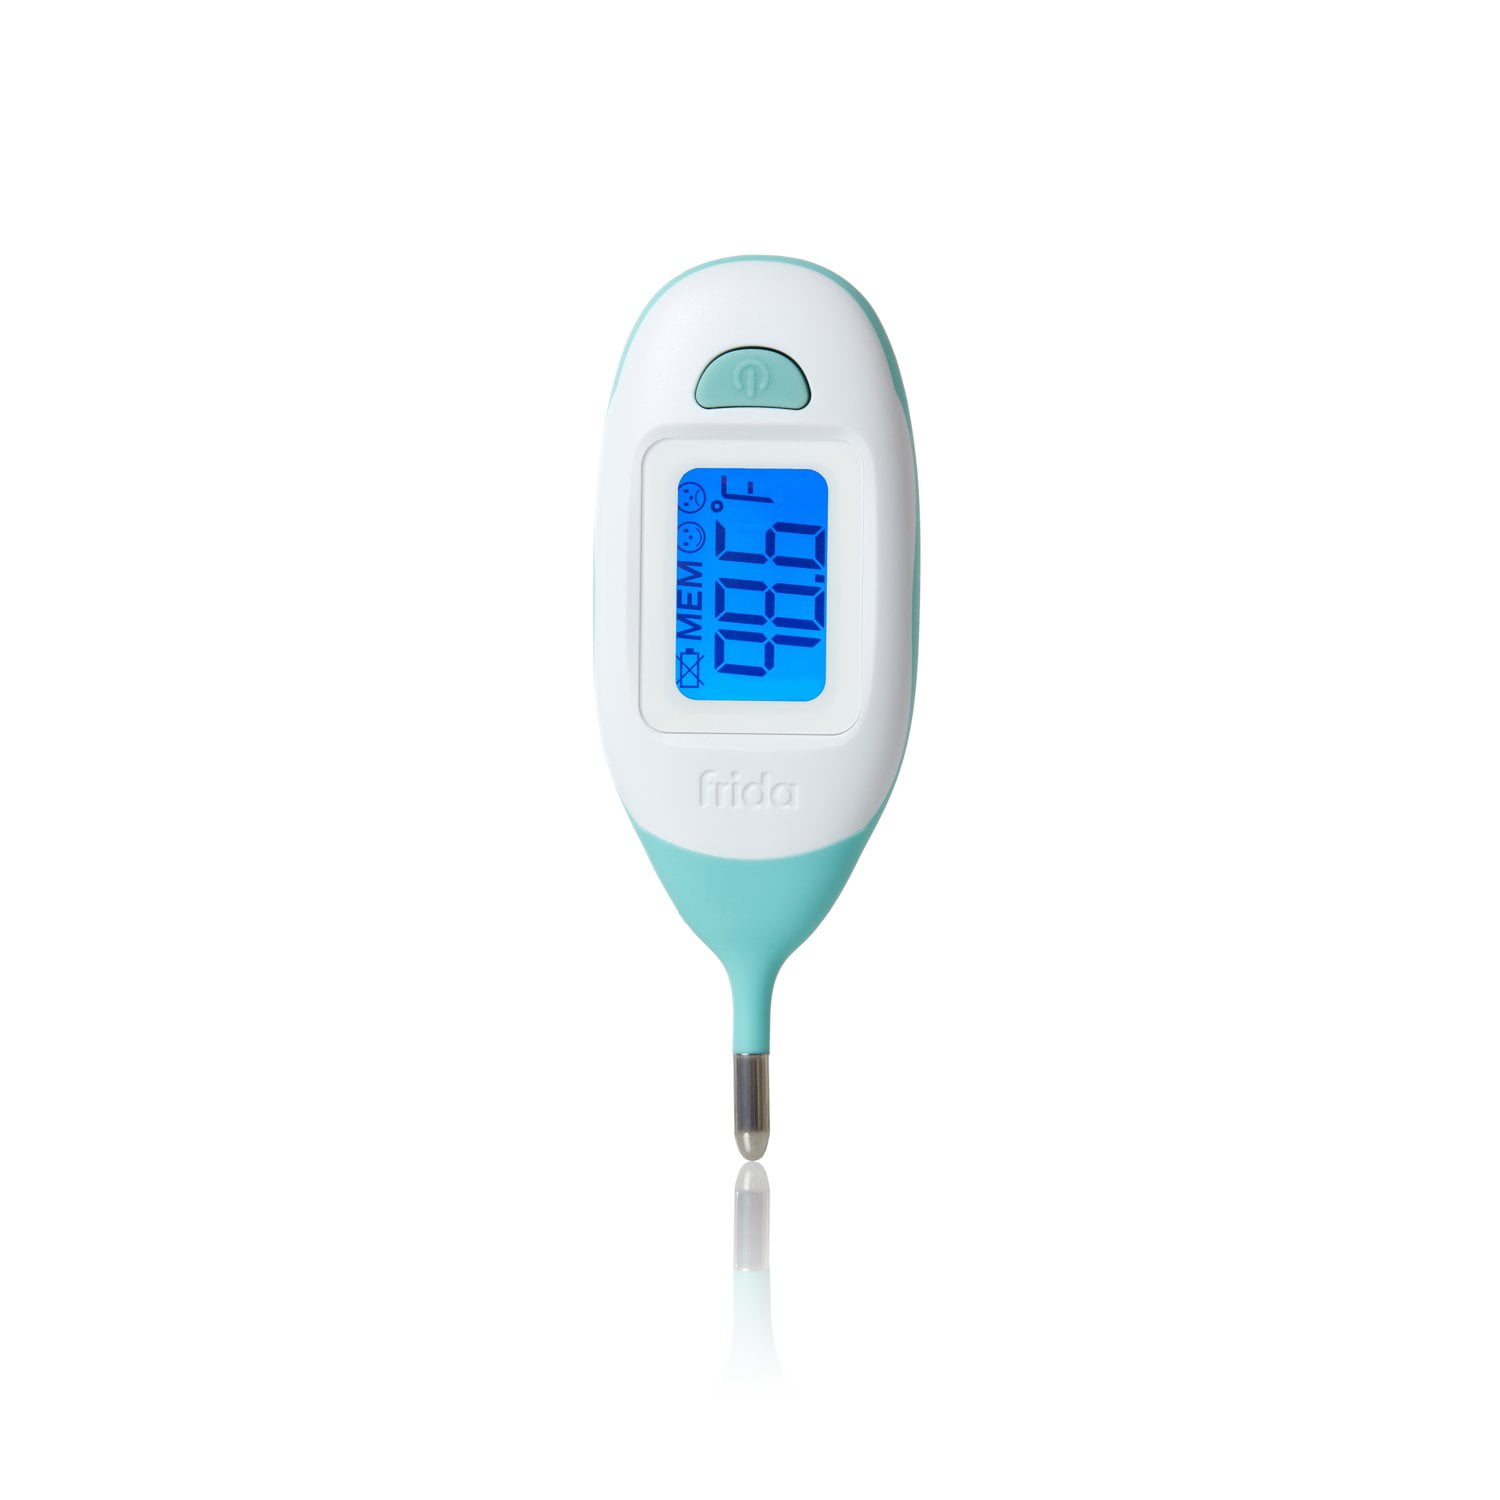 Mommed Baby Thermometer with 3 Measurement Modes(Rectal Oral